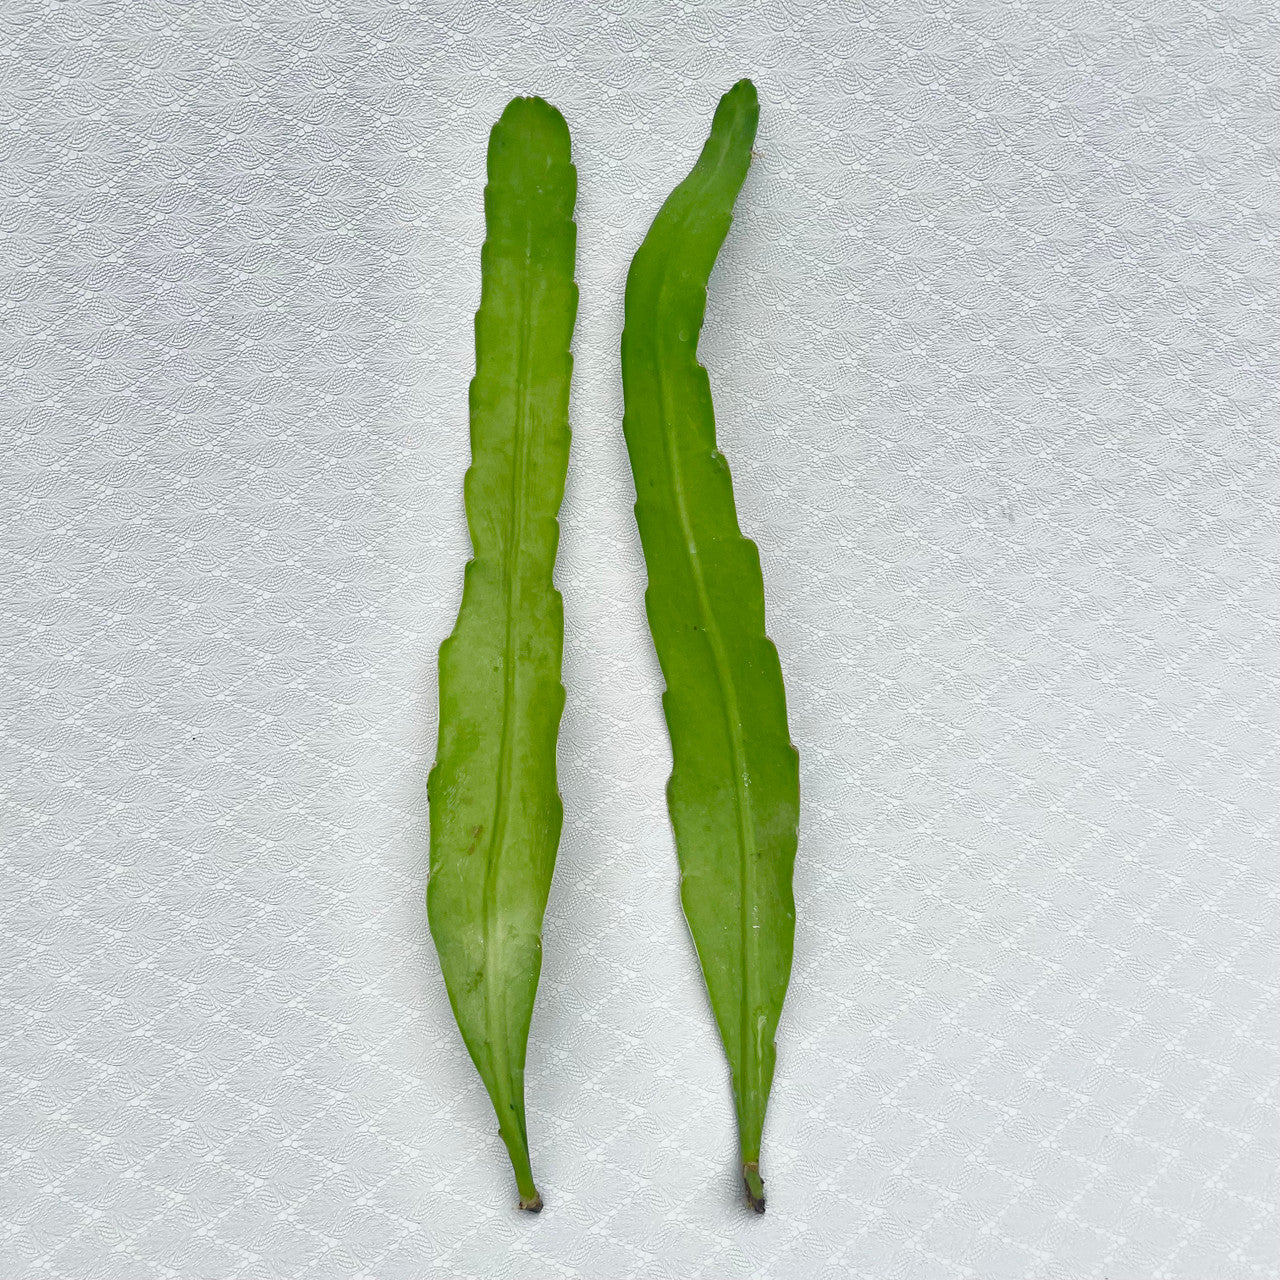 2 Epiphyllum Hookeri (Orchid Cactus) cuttings side by side from a distance